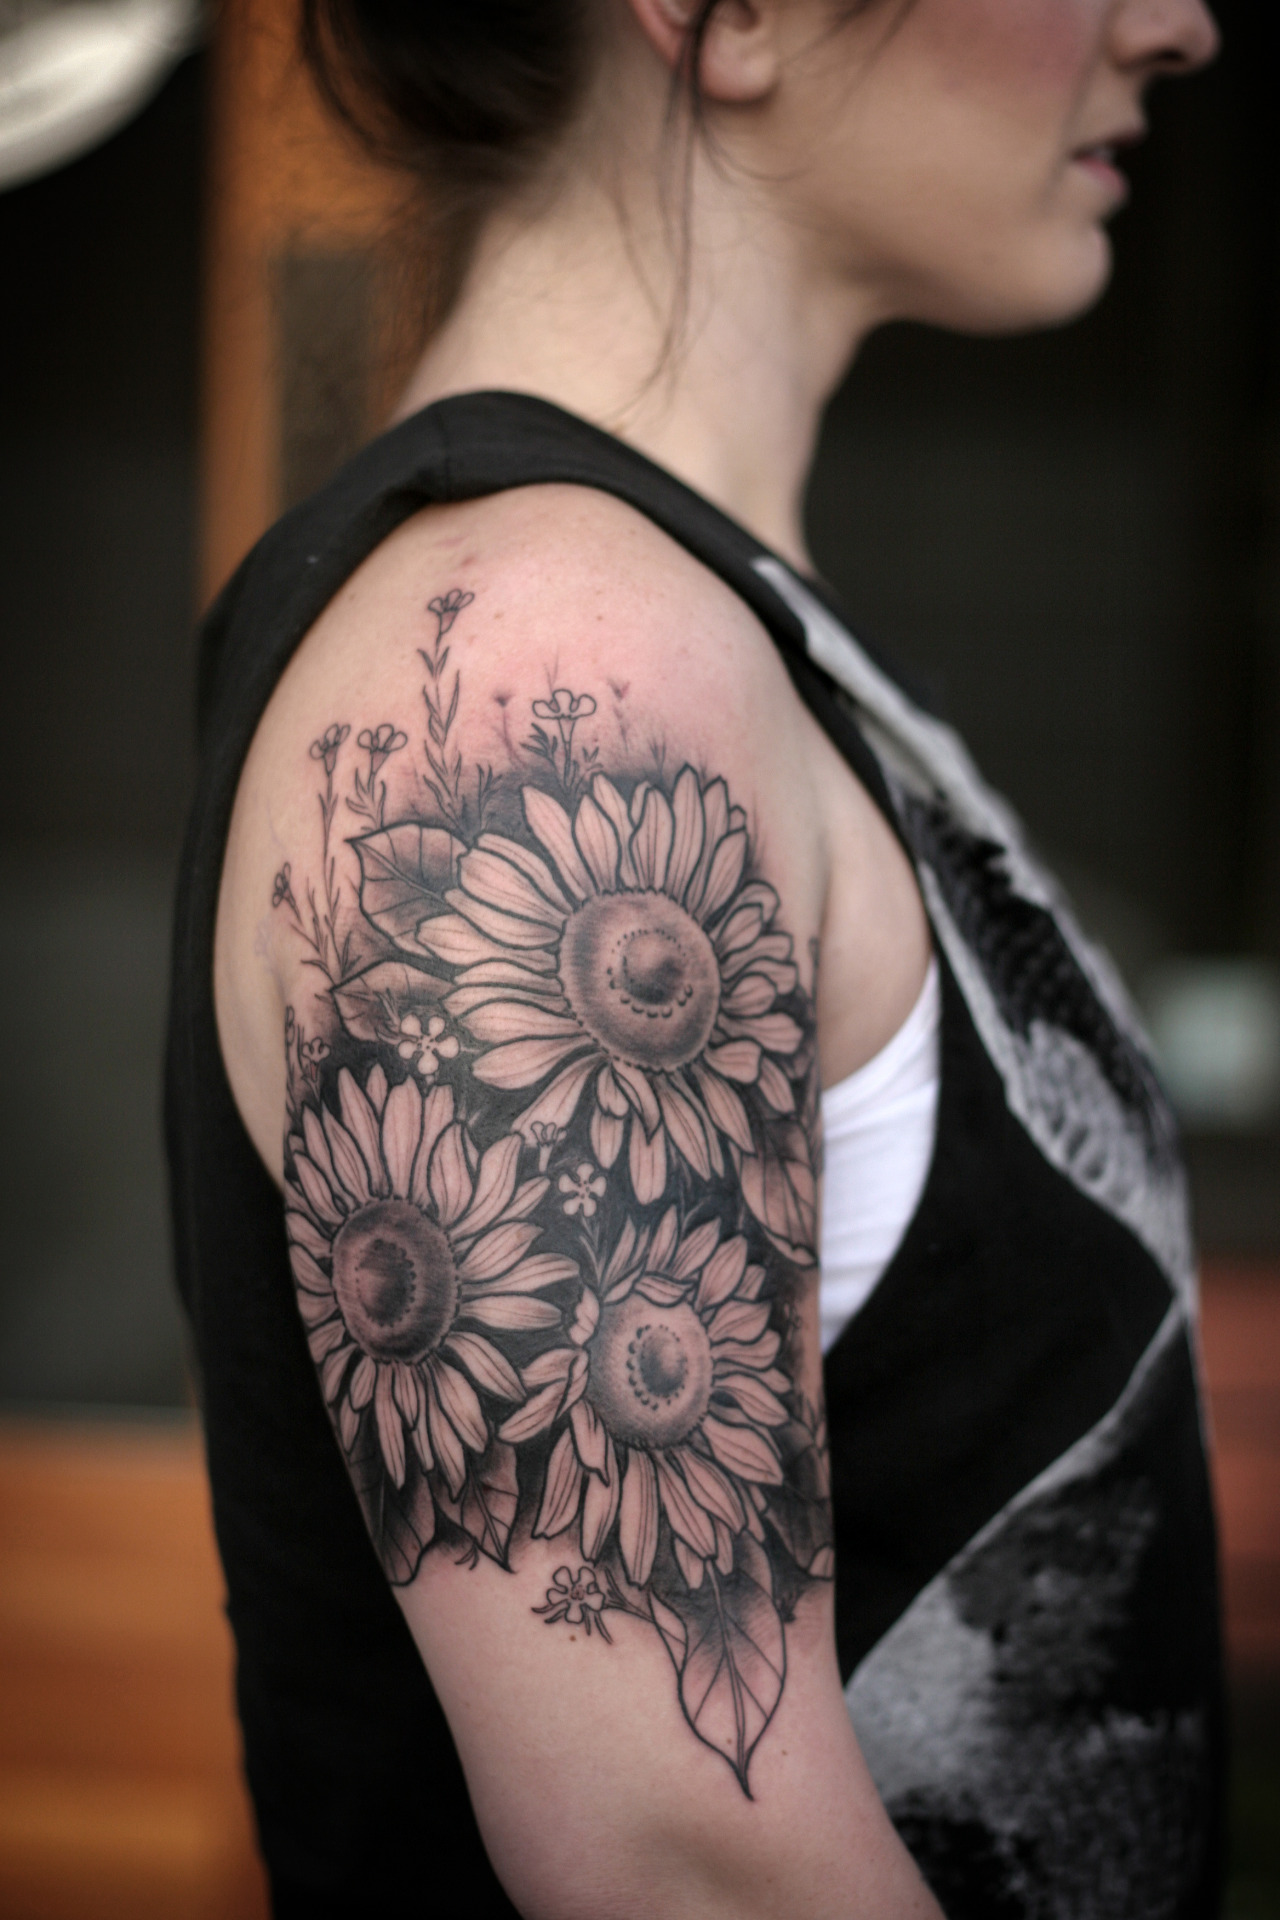 80+ Bright Sunflower Tattoos - Designs & Meanings for Happy Life (2019)